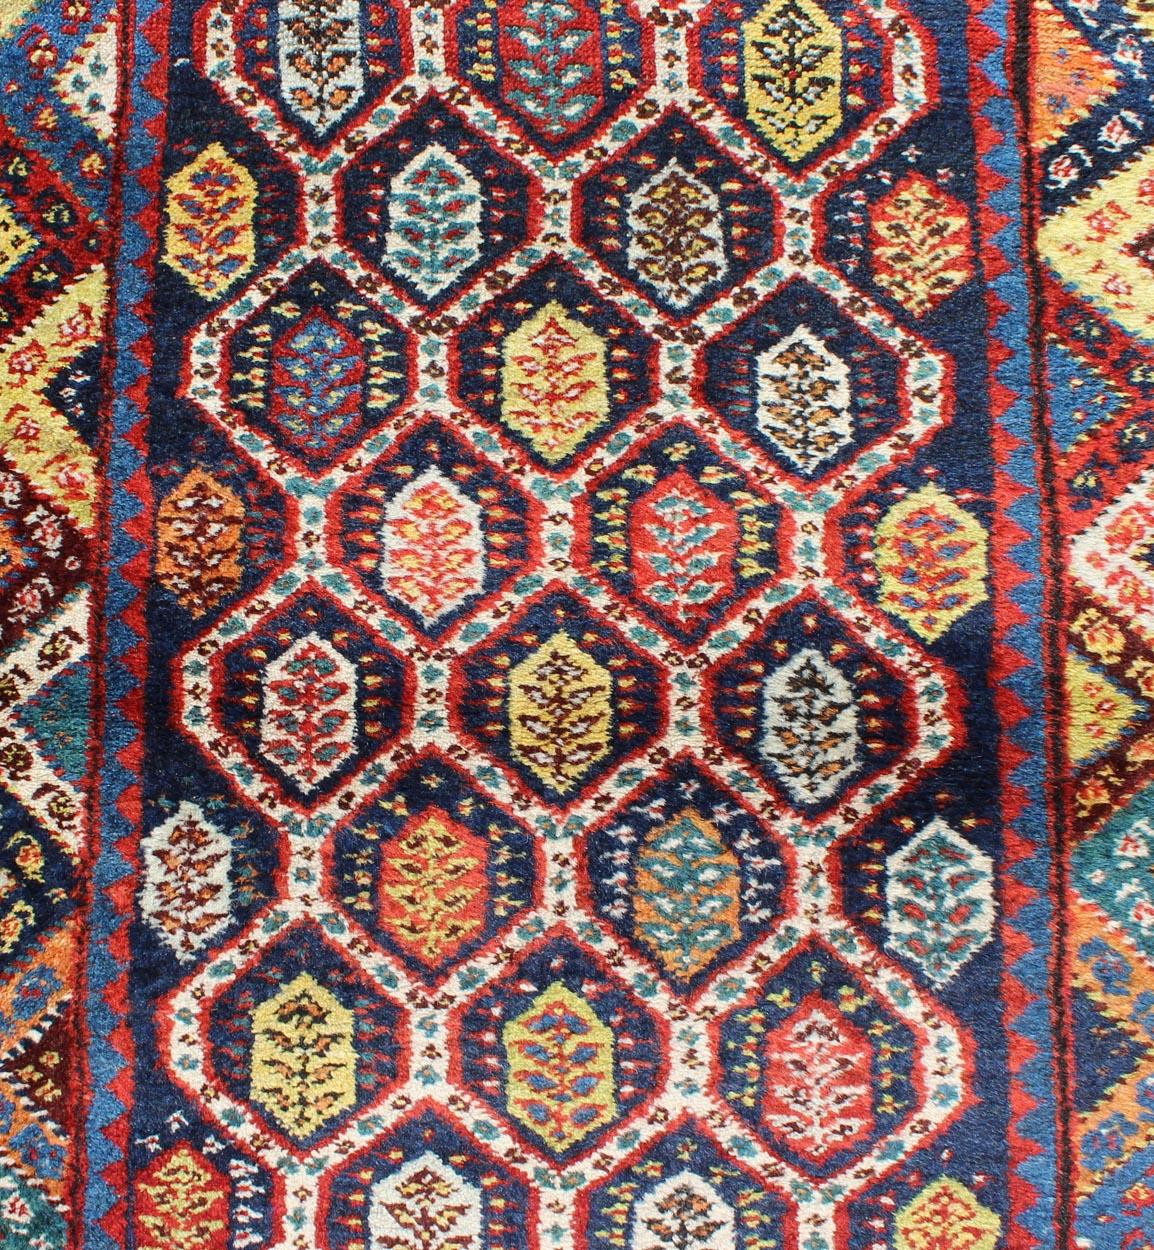 Wool Colorful Antique Persian Lori Runner with Repeating Geometric Palmette Design For Sale